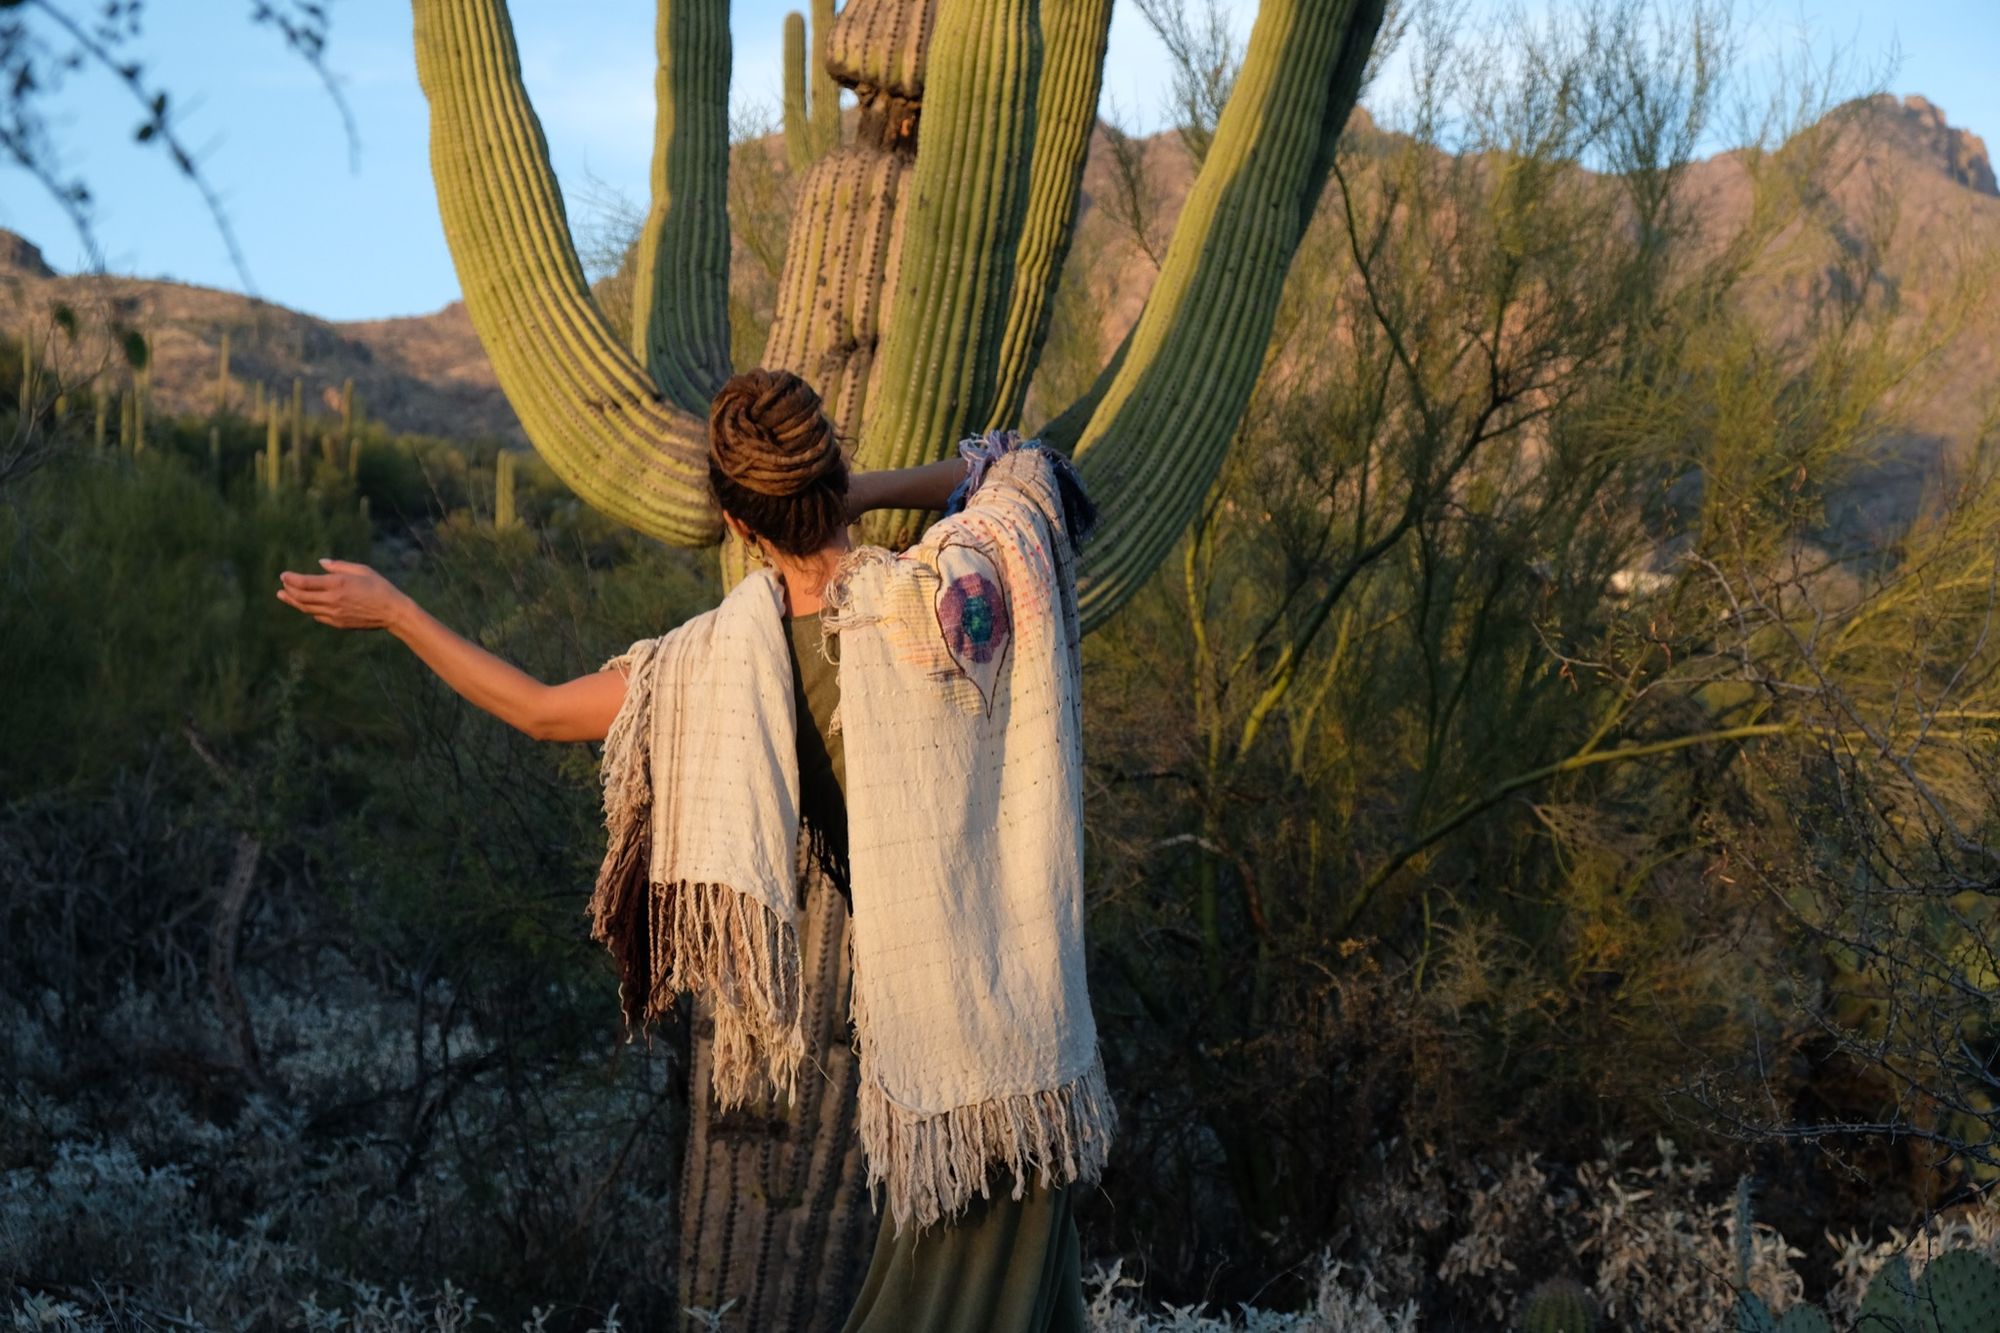 Woman wearing a rainbow, white and brown colored shawl, completely covered in fringe in the desert with cactus and mountains